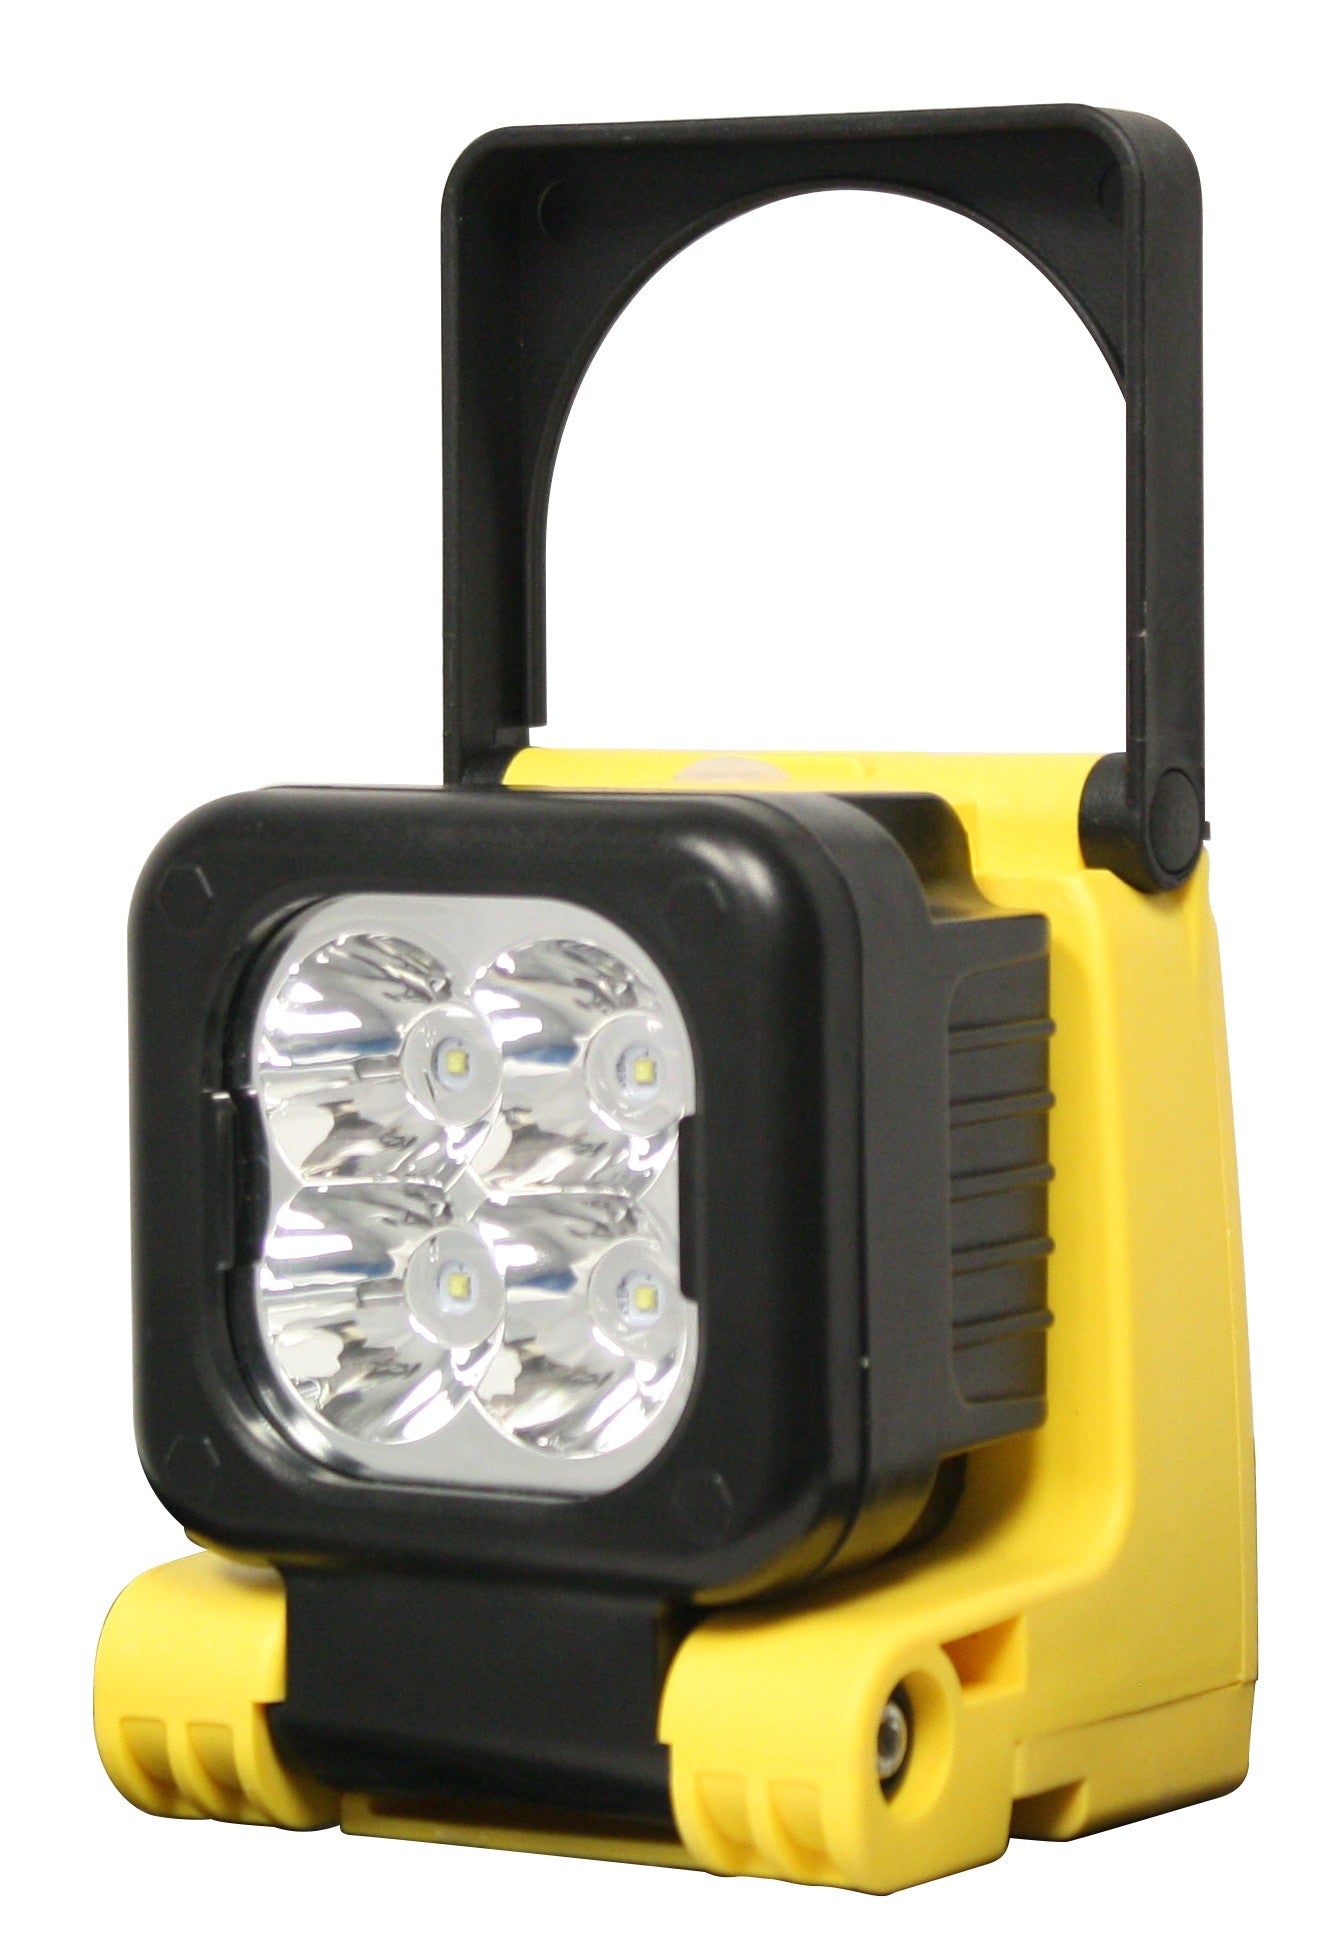 SpeedDemon 12w Rechargeable Lantern with Magnetic Base